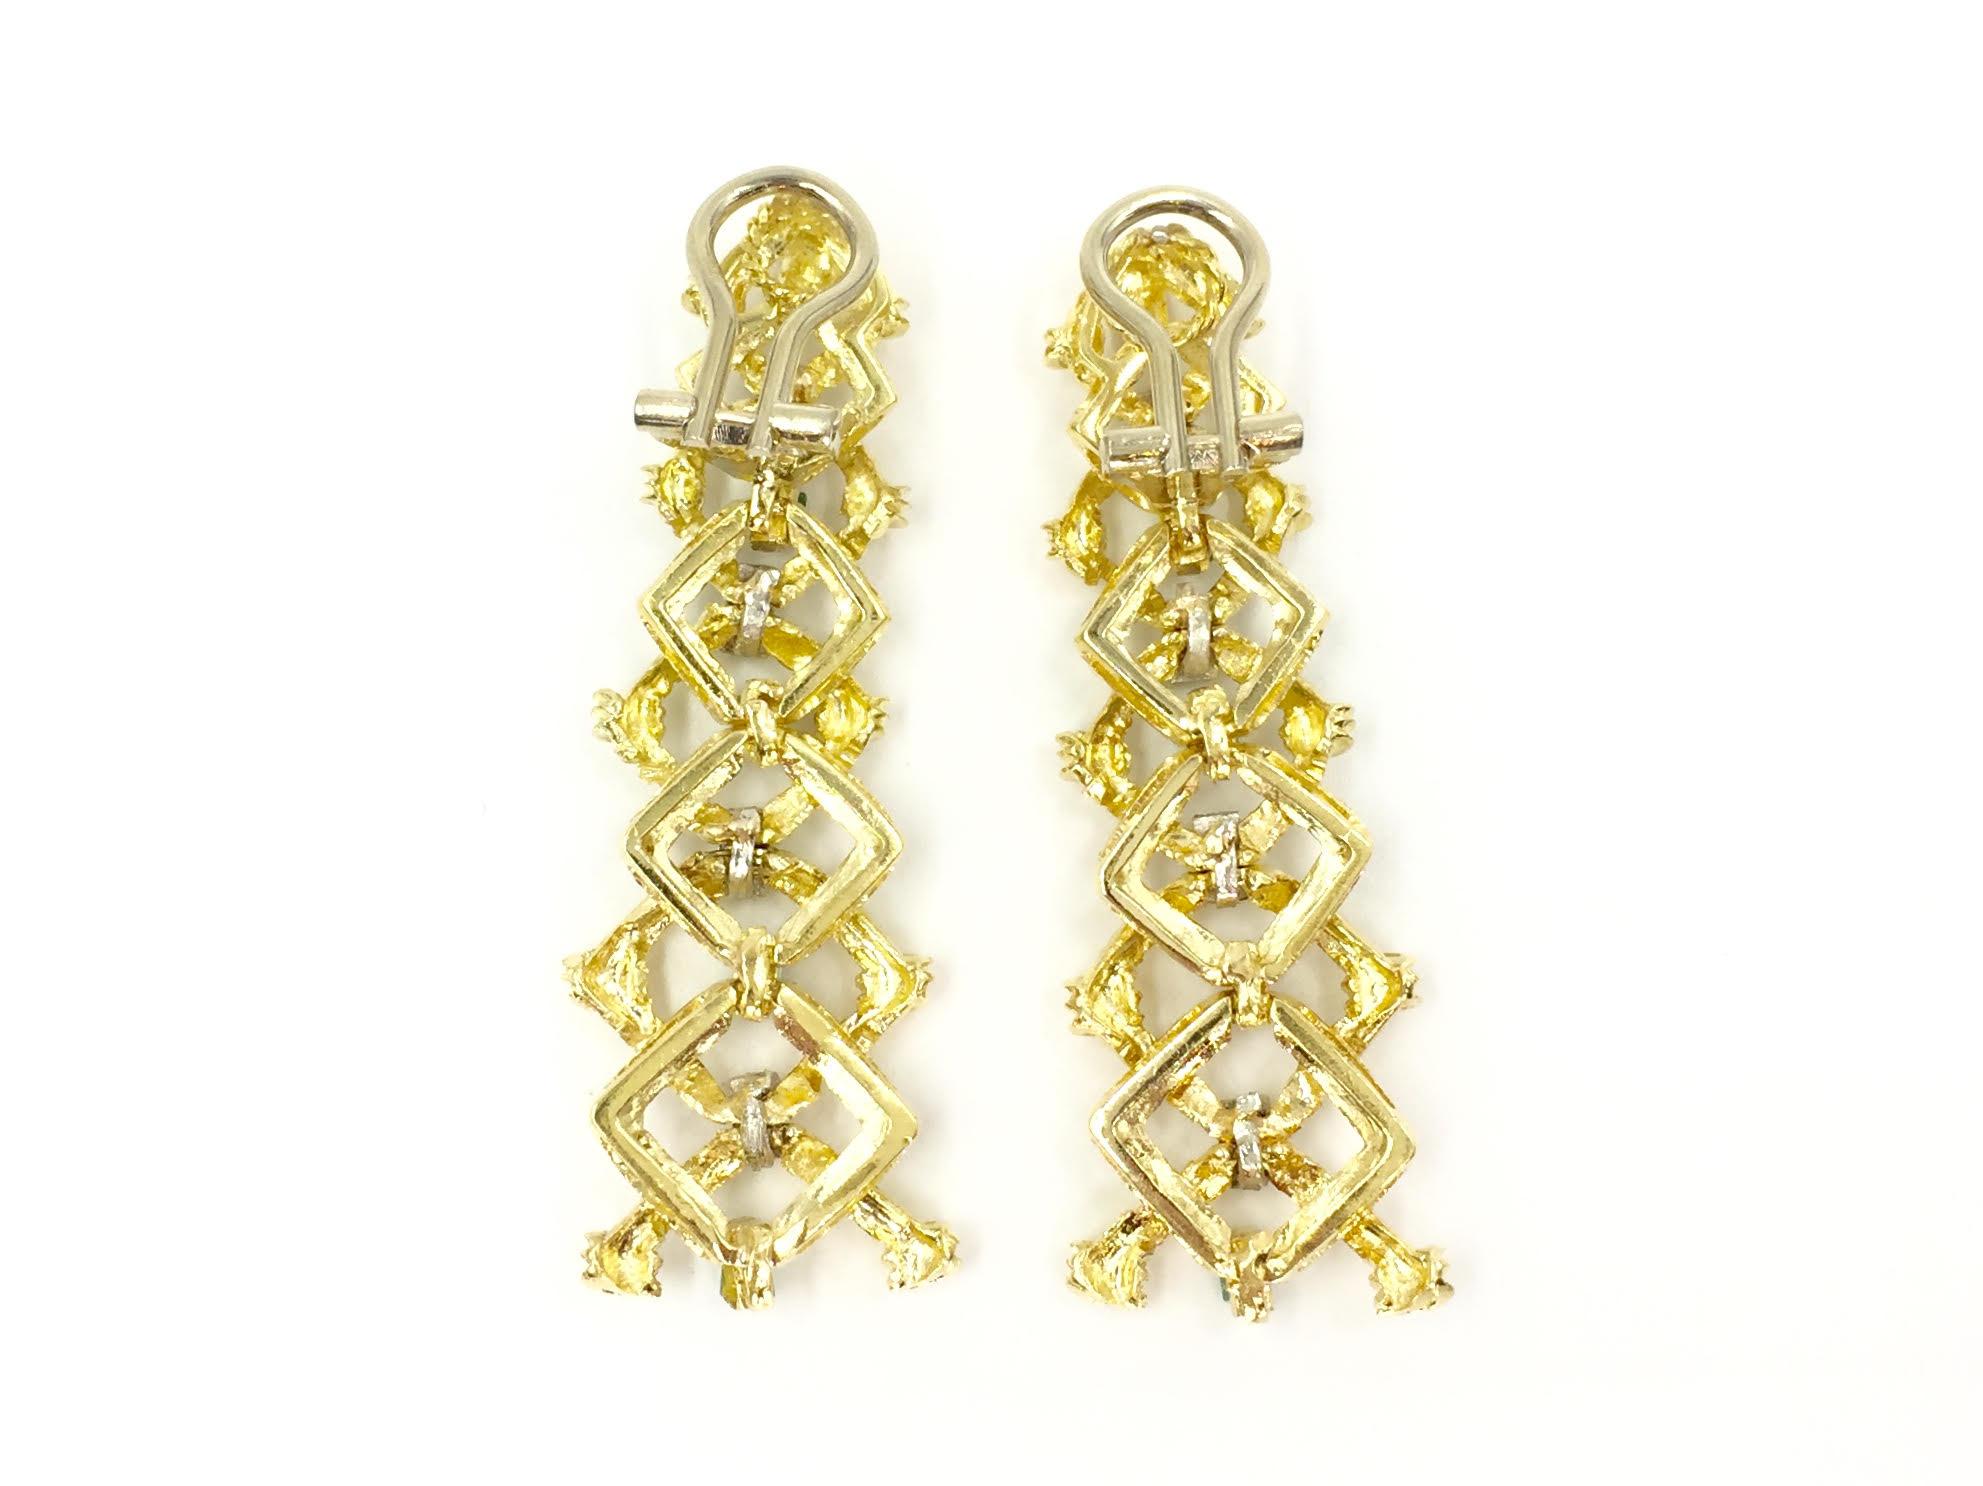 Unique mid-century 18 karat yellow gold geometric link design drop earrings featuring baguette diamonds and emeralds. Earrings have approximately .50 carat of emeralds and .30 carats of baguette diamonds. Drop of earrings have movement so they do